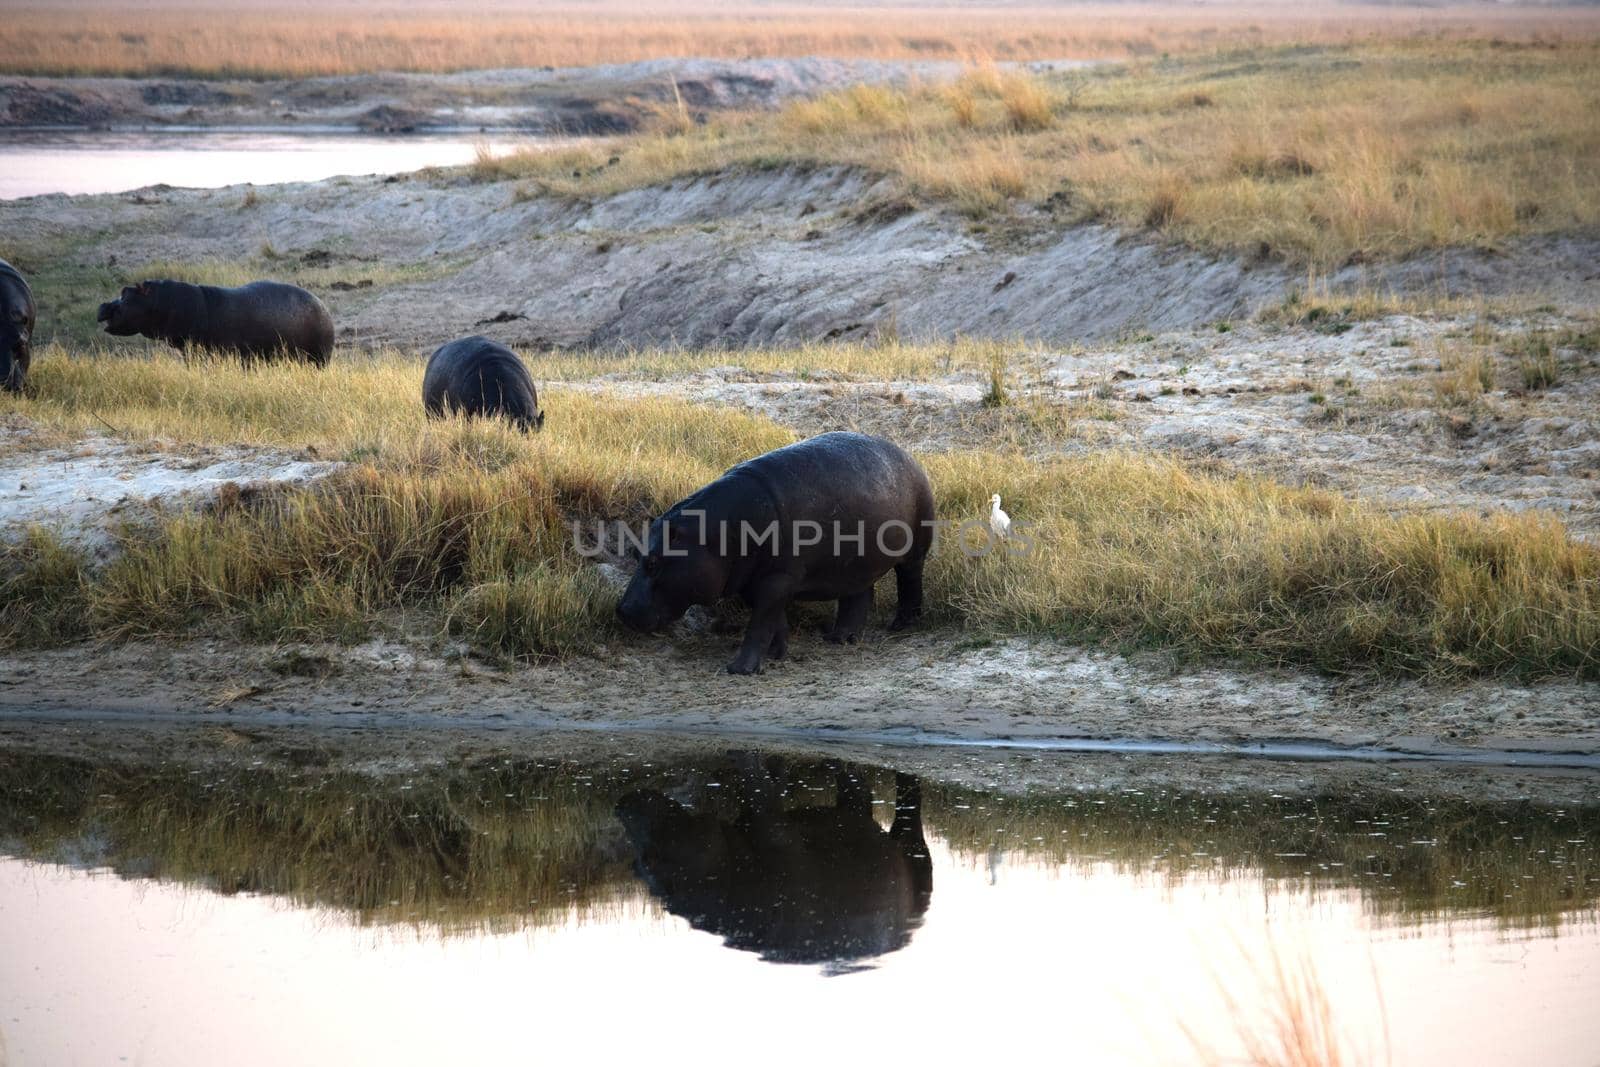 A huge hippopotamus reflected in the waters of the Chobe River by silentstock639